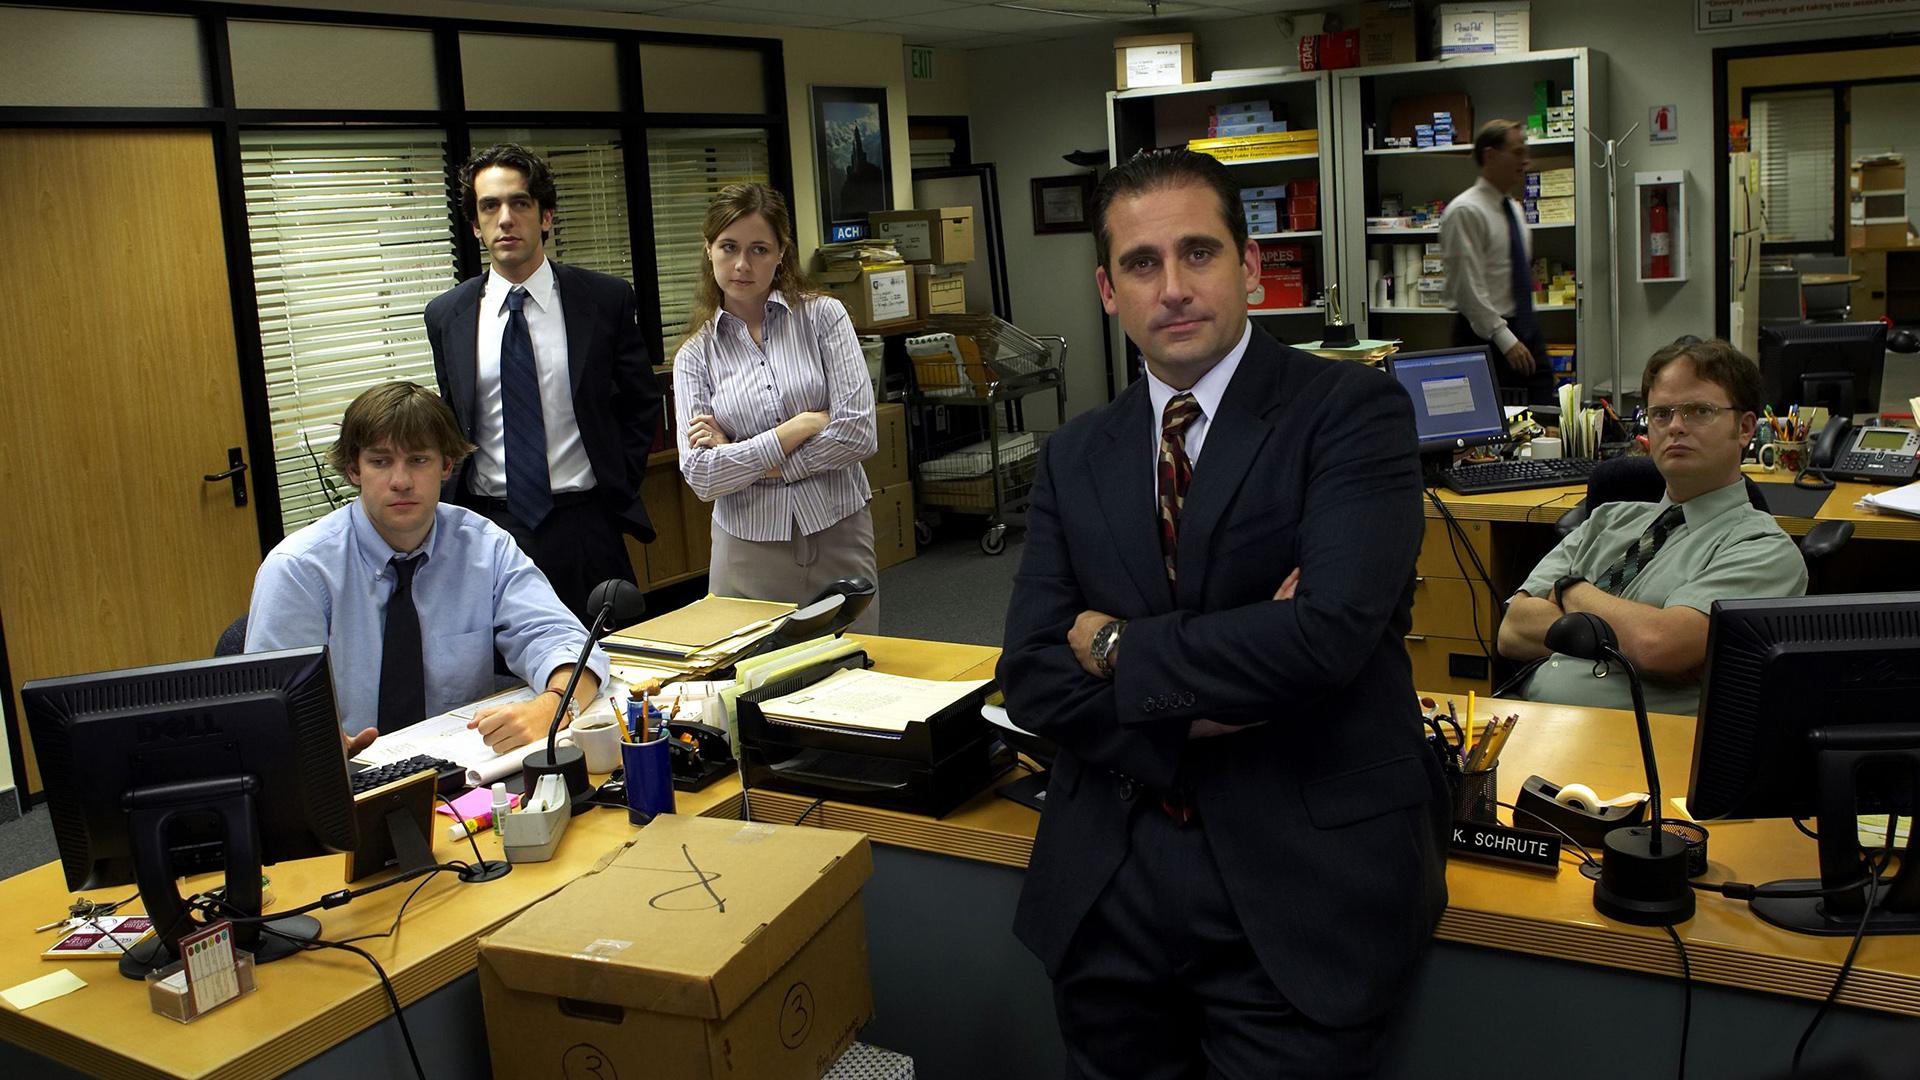 1920 x 1080 · jpeg - The Office (US) Wallpapers, Pictures, Images